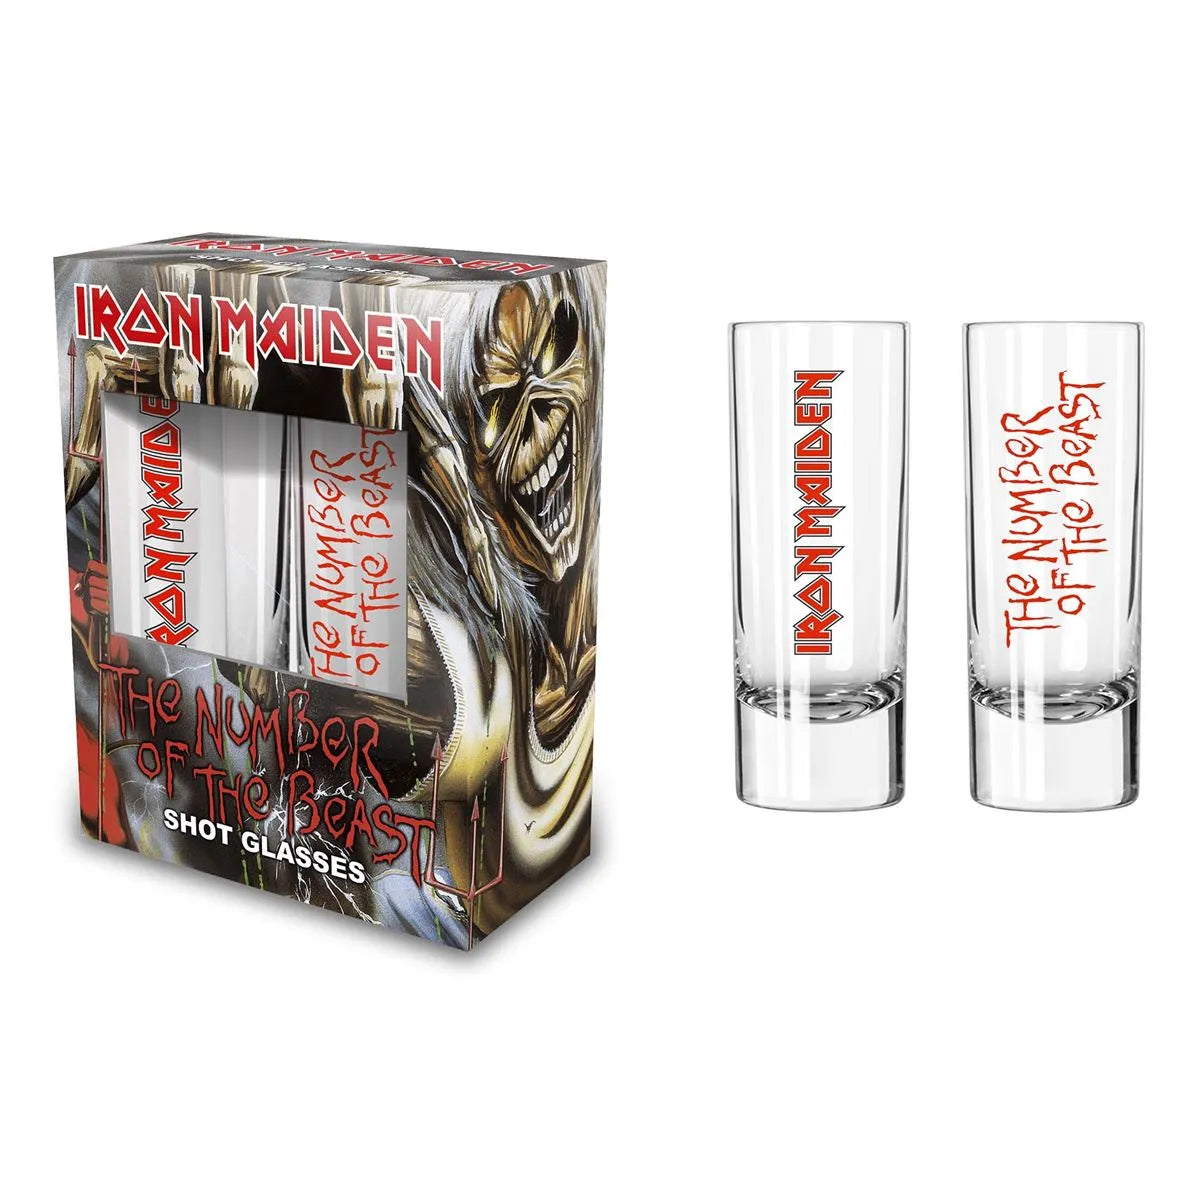 Iron Maiden -The Number of the Beast, Shot Glass Set